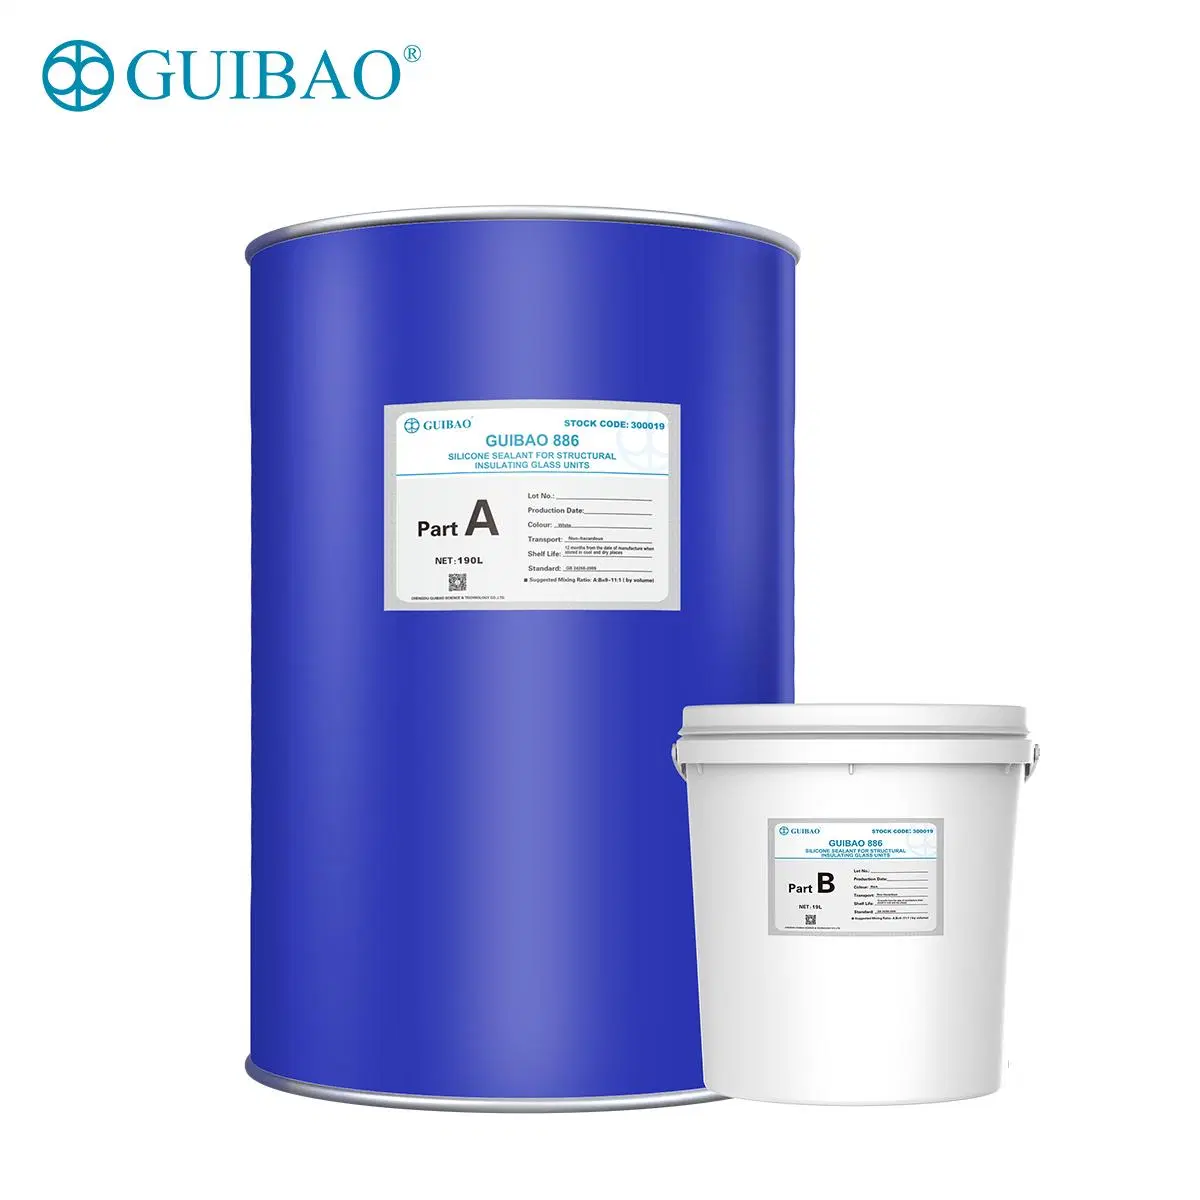 GUIBAO 886 Silicone Structural Insulating Glass Sealant for Secondary Sealing